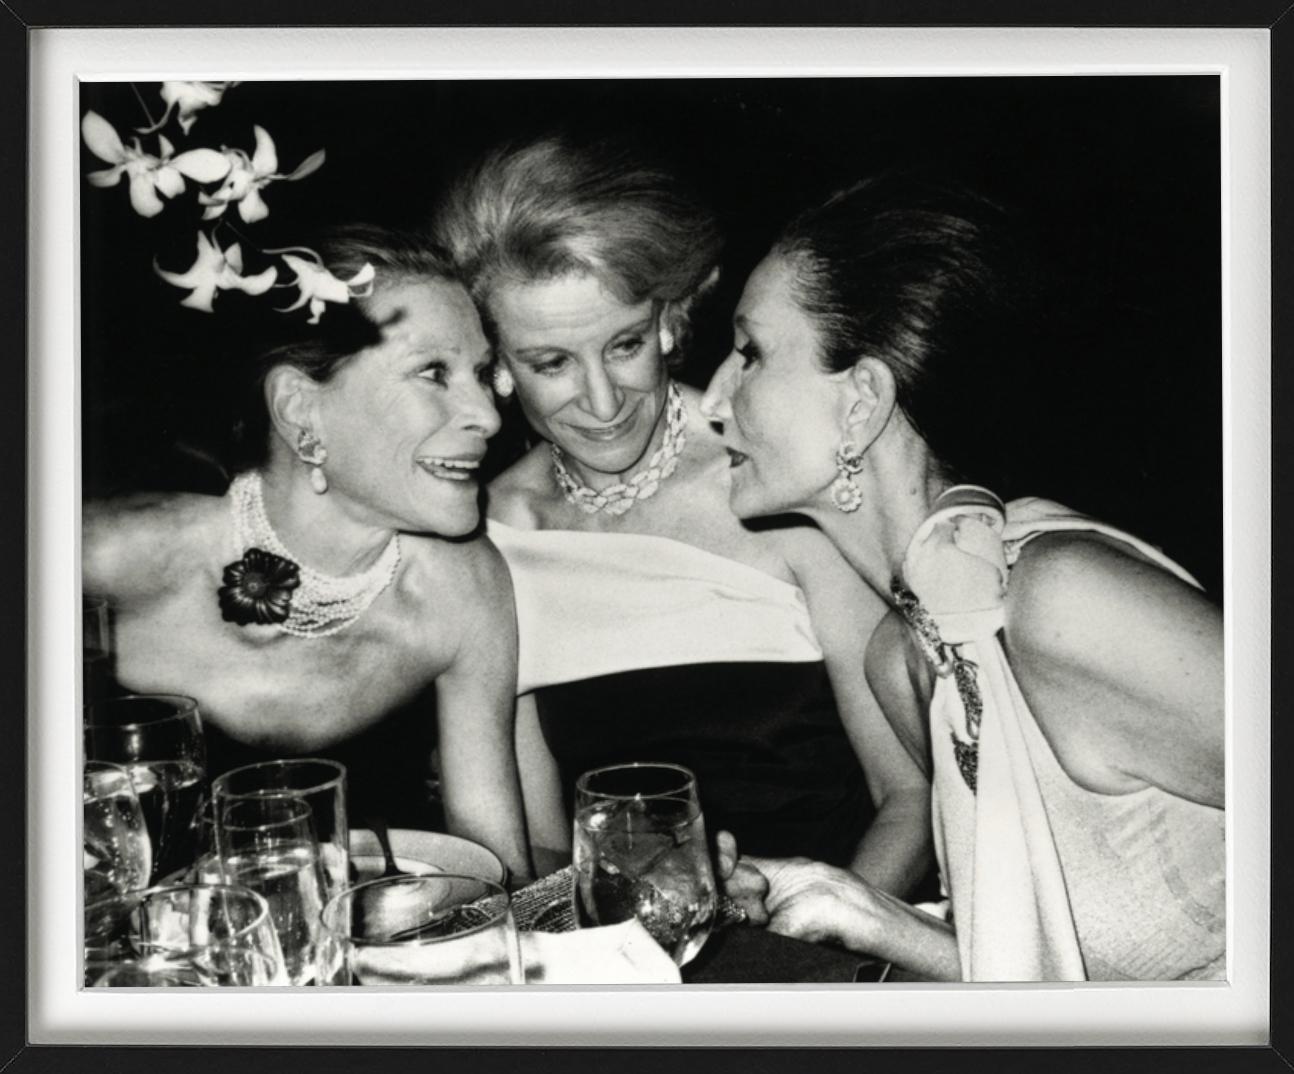 Nan Kempner, Fran Stark and Jaqueline de Ribes, NYC - fine art photography, 1984 - Photograph by Roxanne Lowit